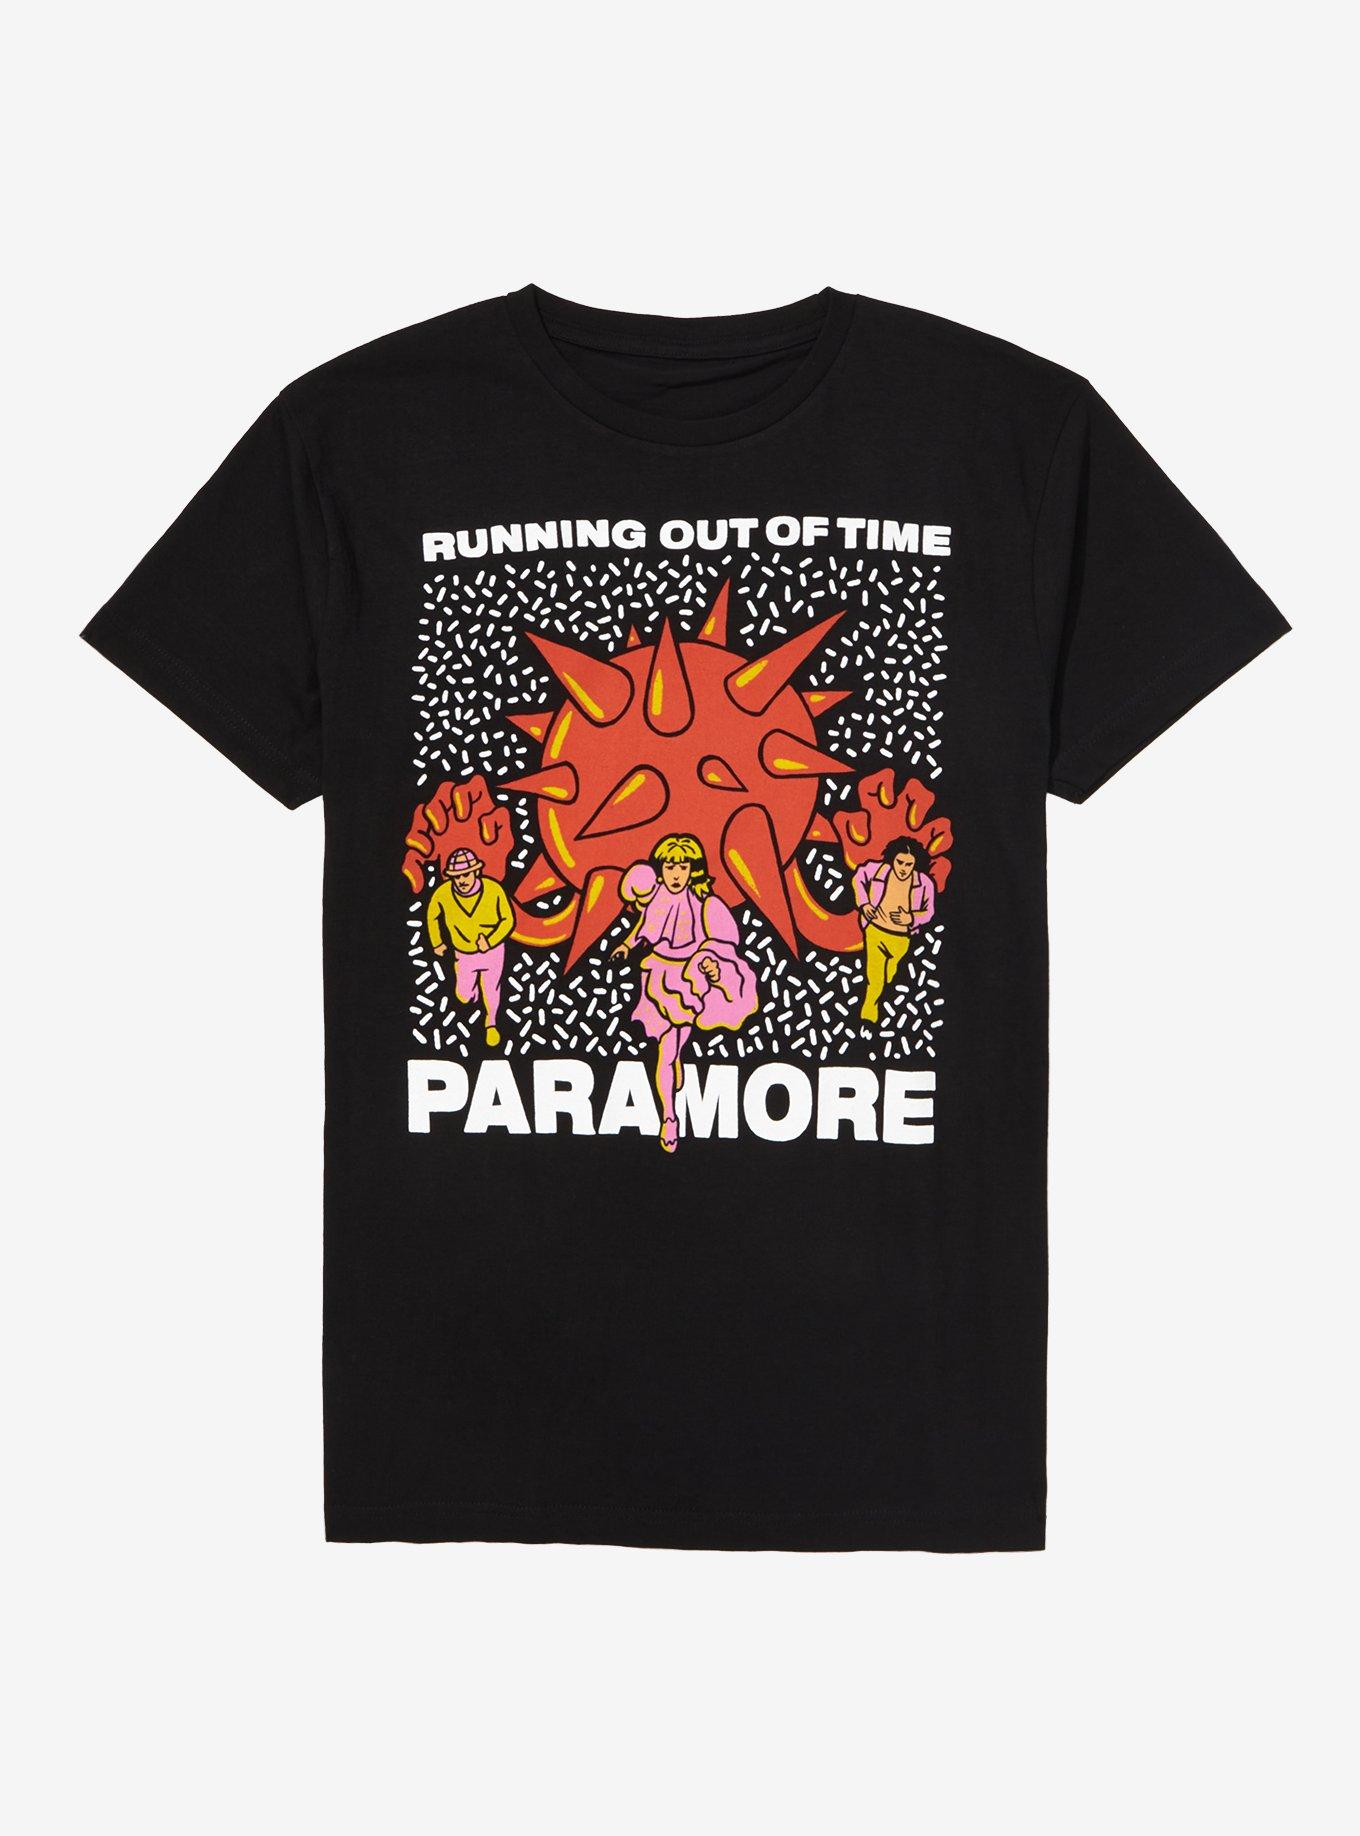 Paramore - Official Store